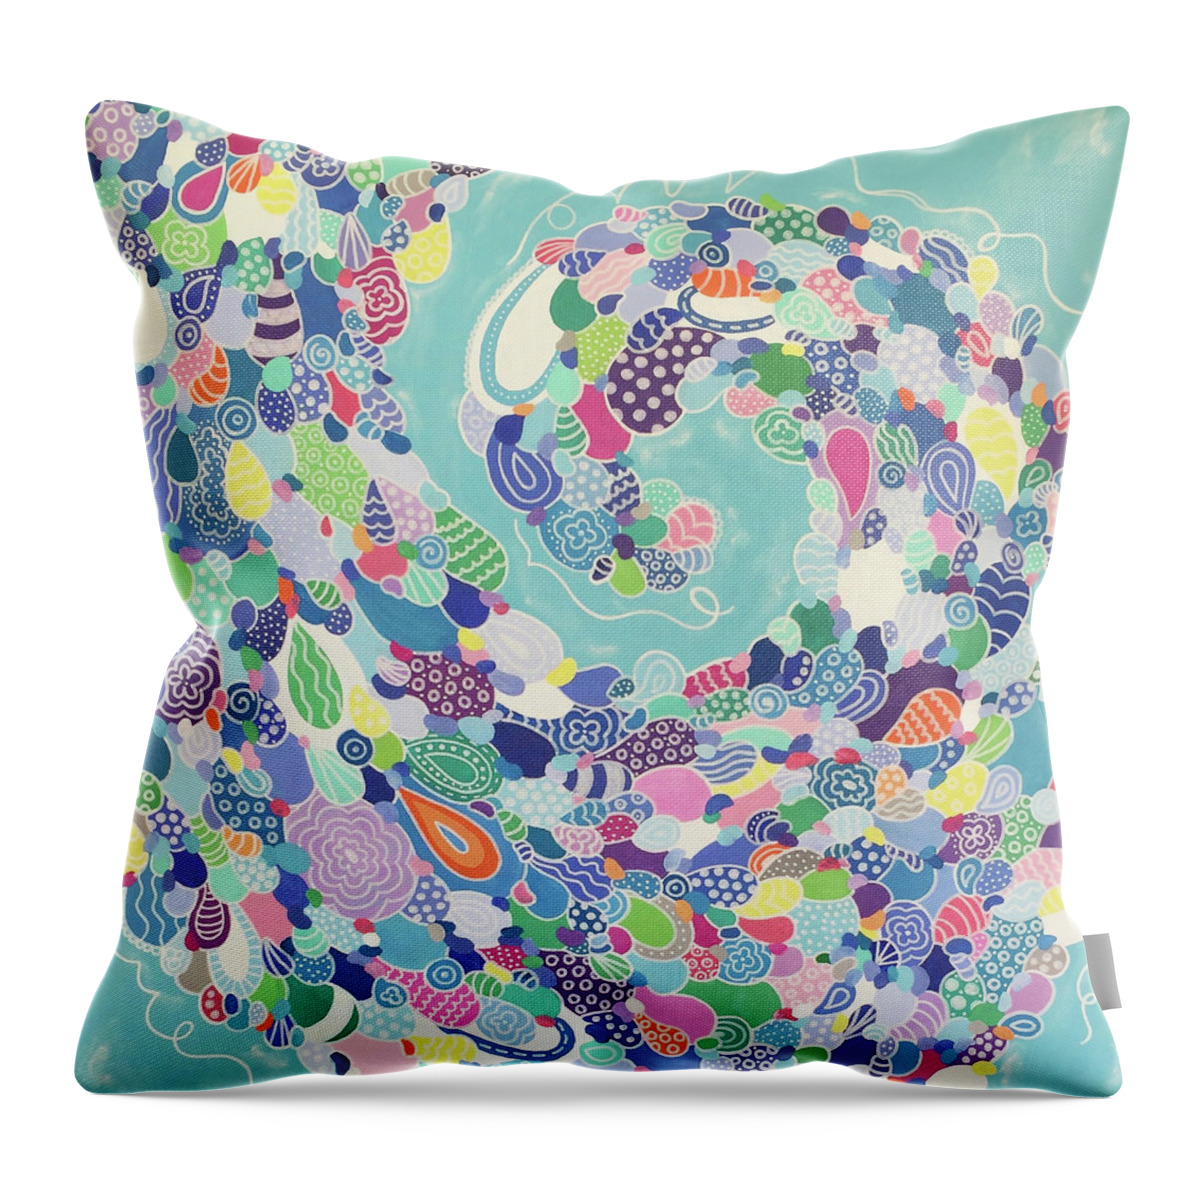 Pattern Art Throw Pillow featuring the painting Sweeping Medley by Beth Ann Scott